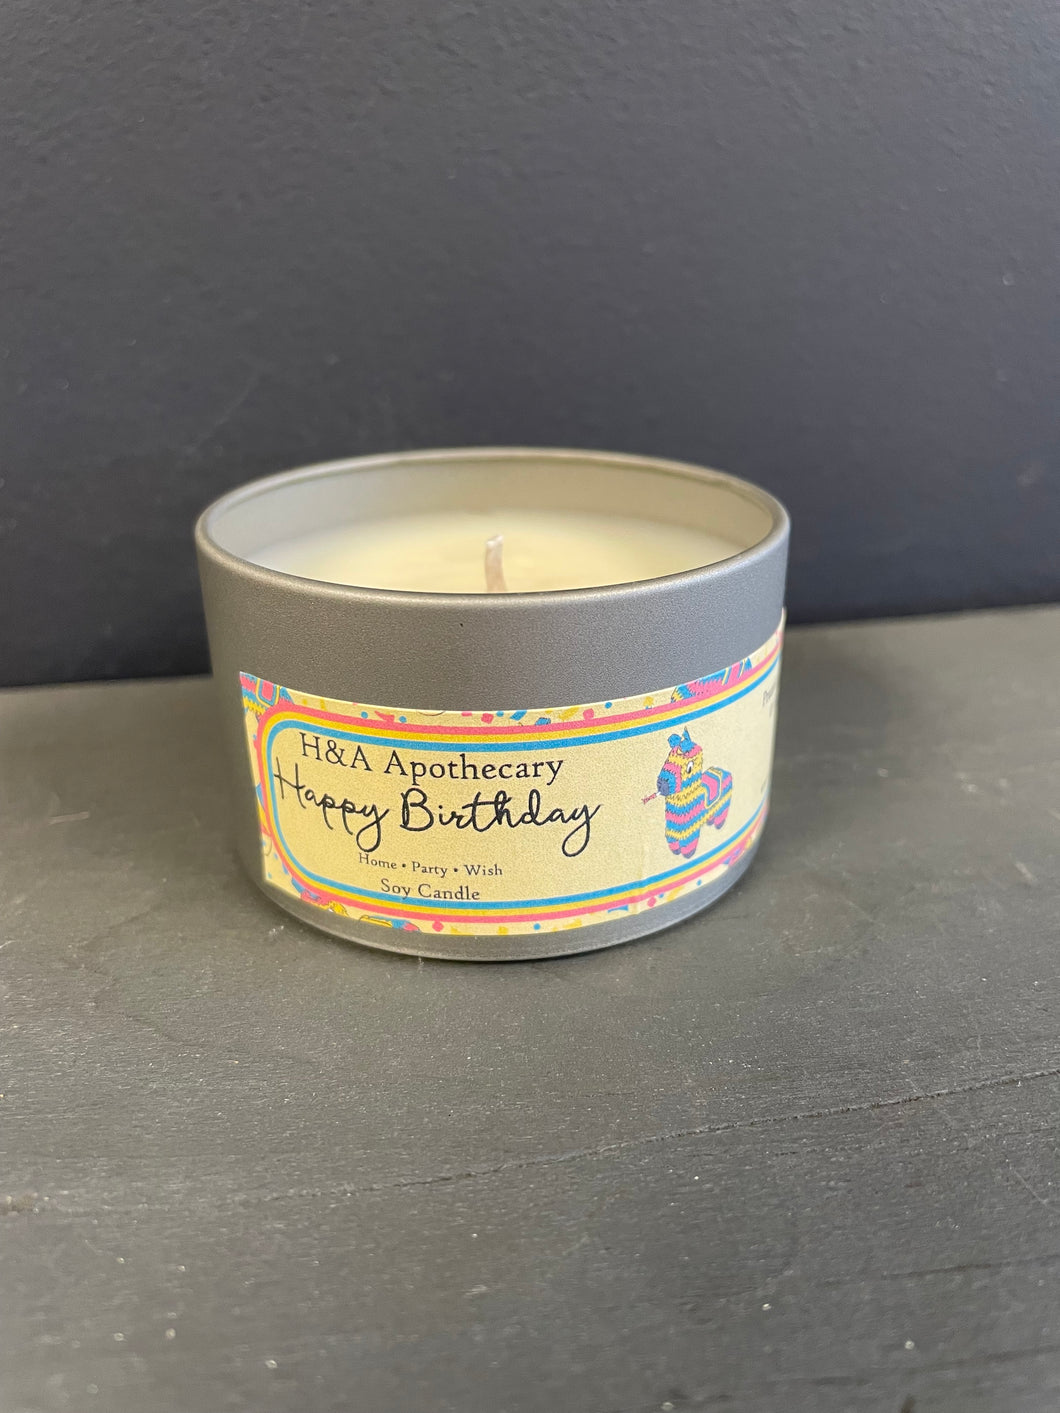 H&A Apothecary Happy Birthday Soy Candle